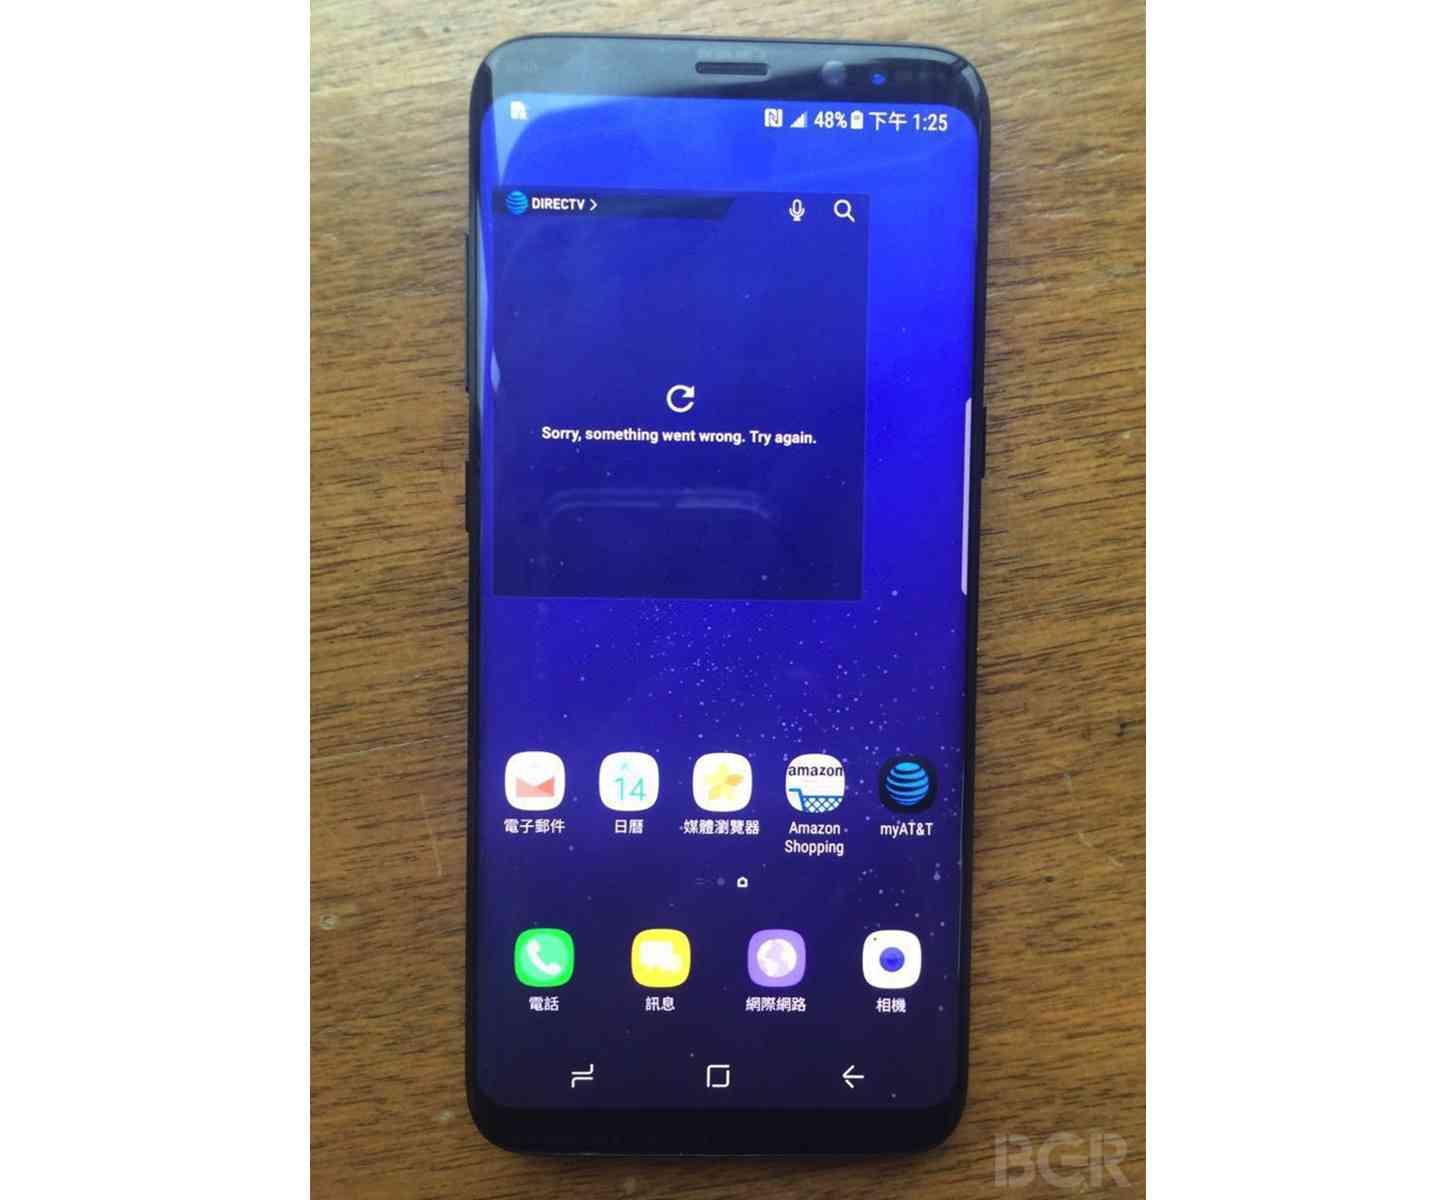 Samsung Galaxy S8 leak on-screen buttons